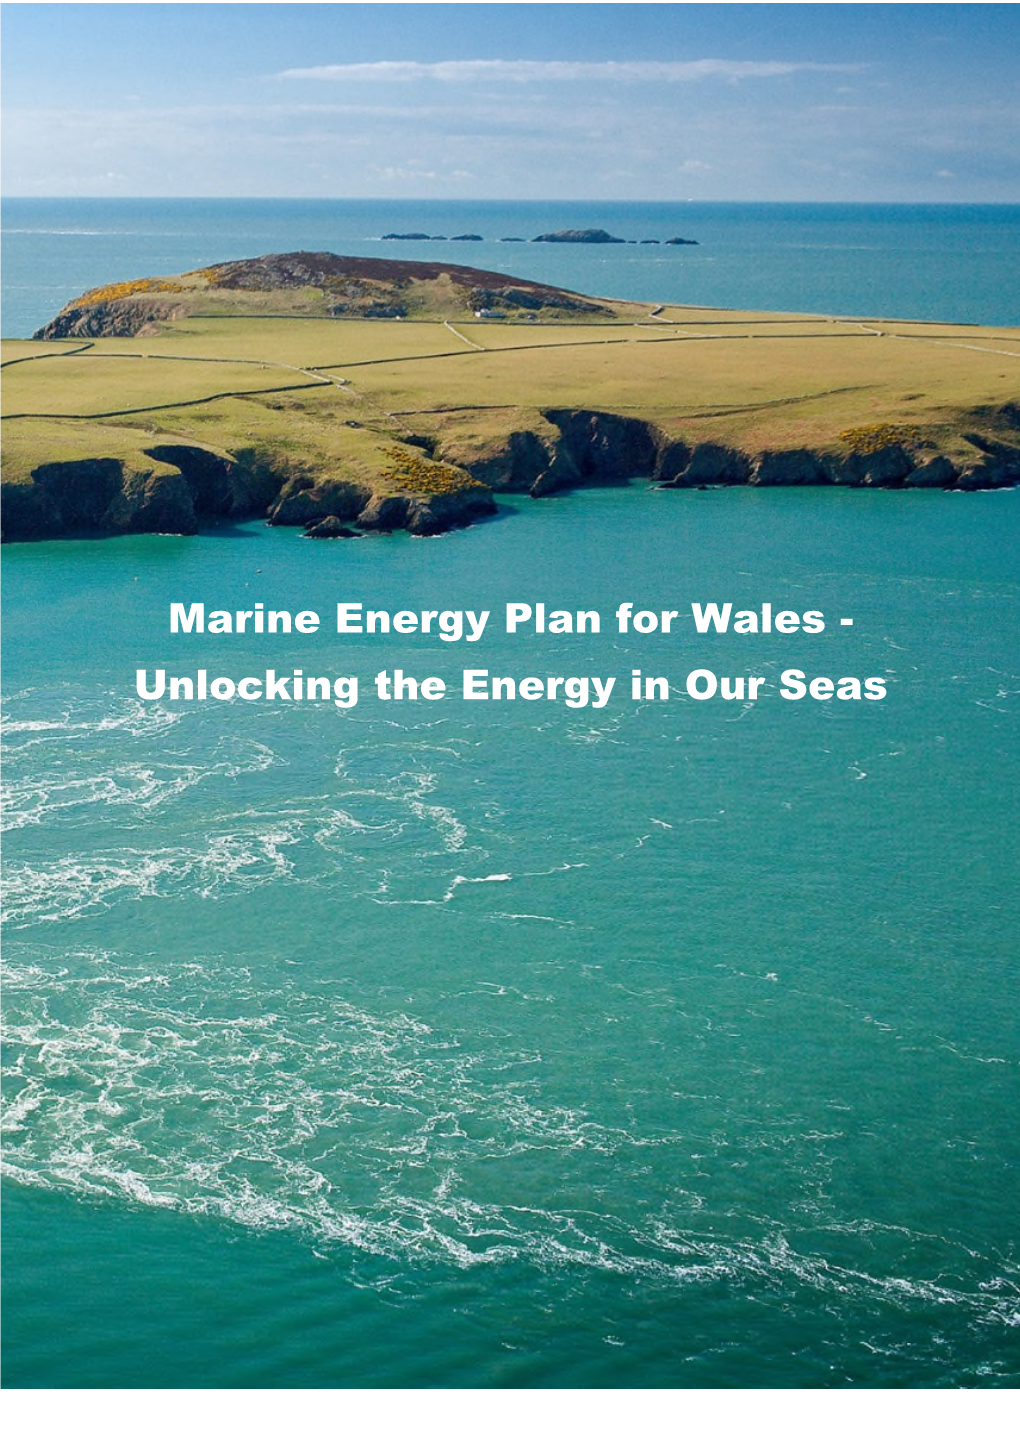 Marine Energy Plan for Wales - Unlocking the Energy in Our Seas Marine Energy Plan for Wales - Unlocking the Energy in Our Seas